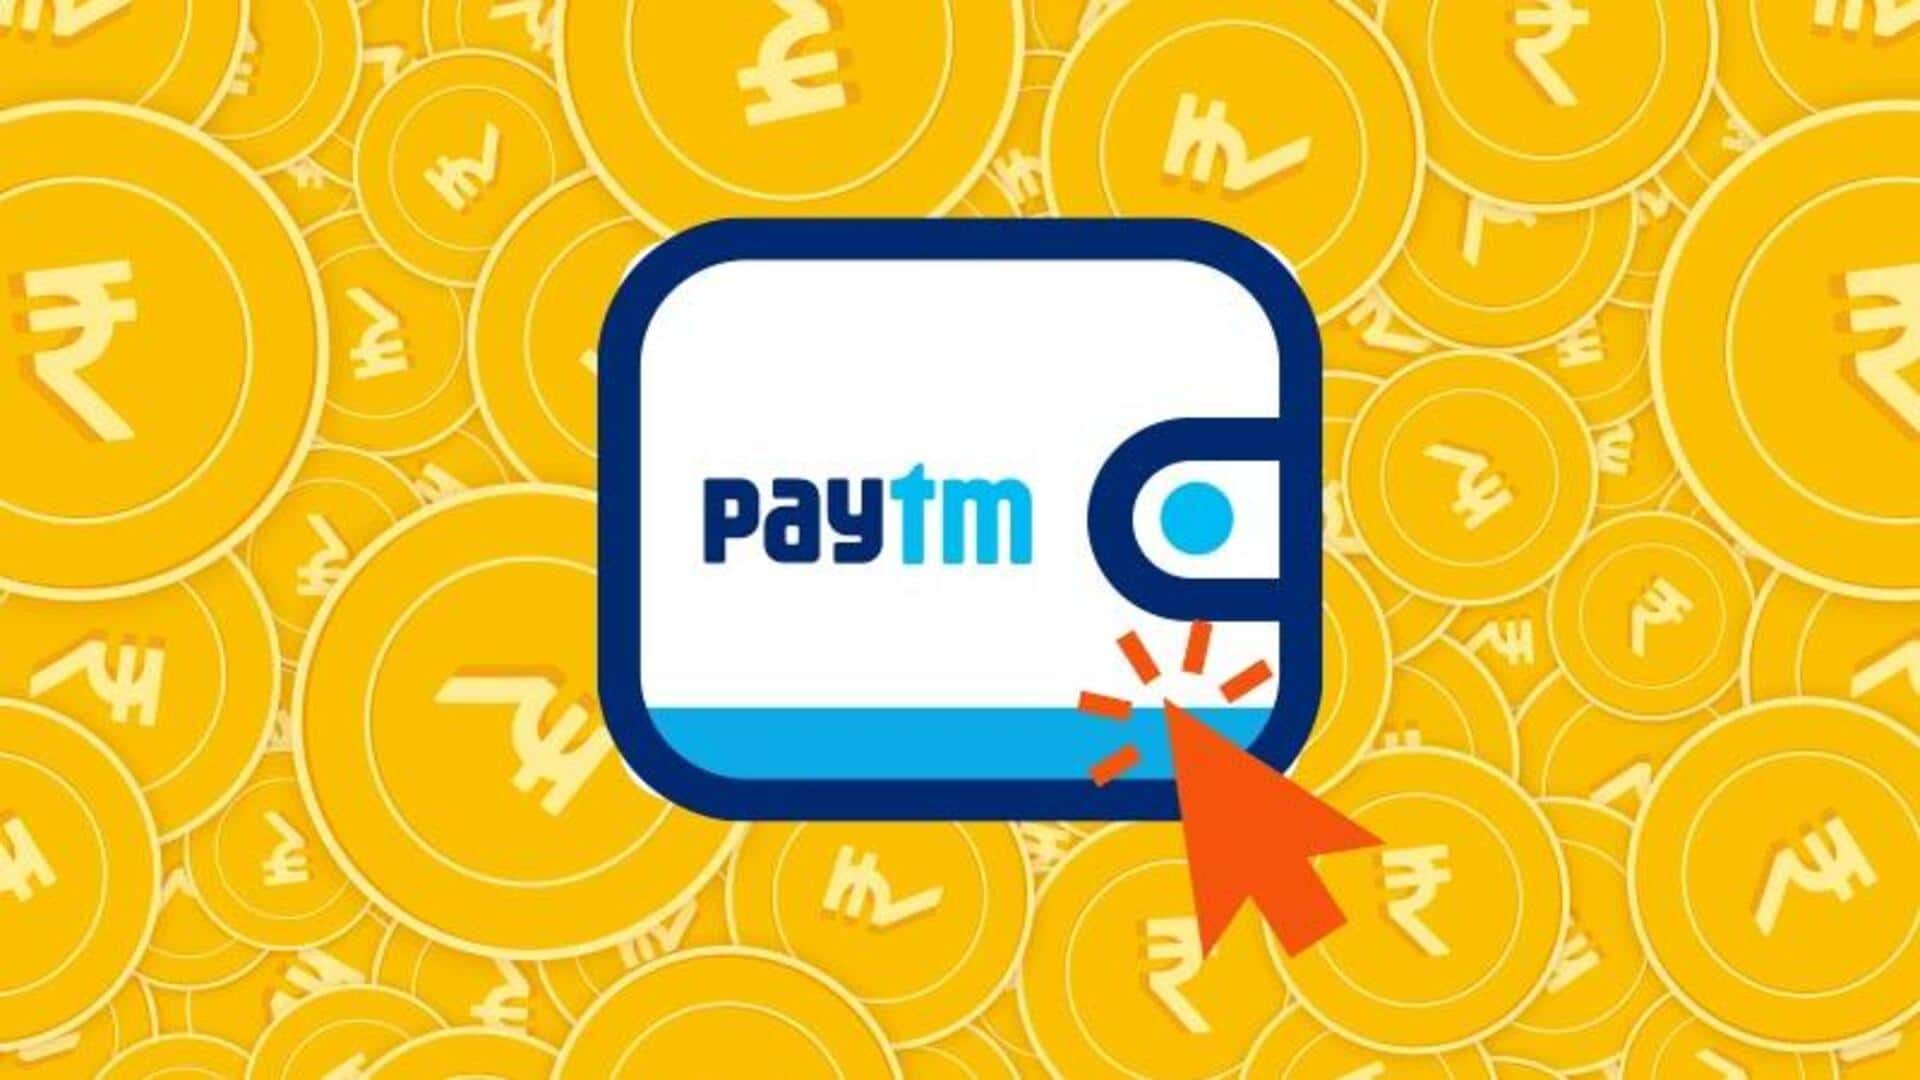 Paytm delinked from its payment bank: Here's what it means